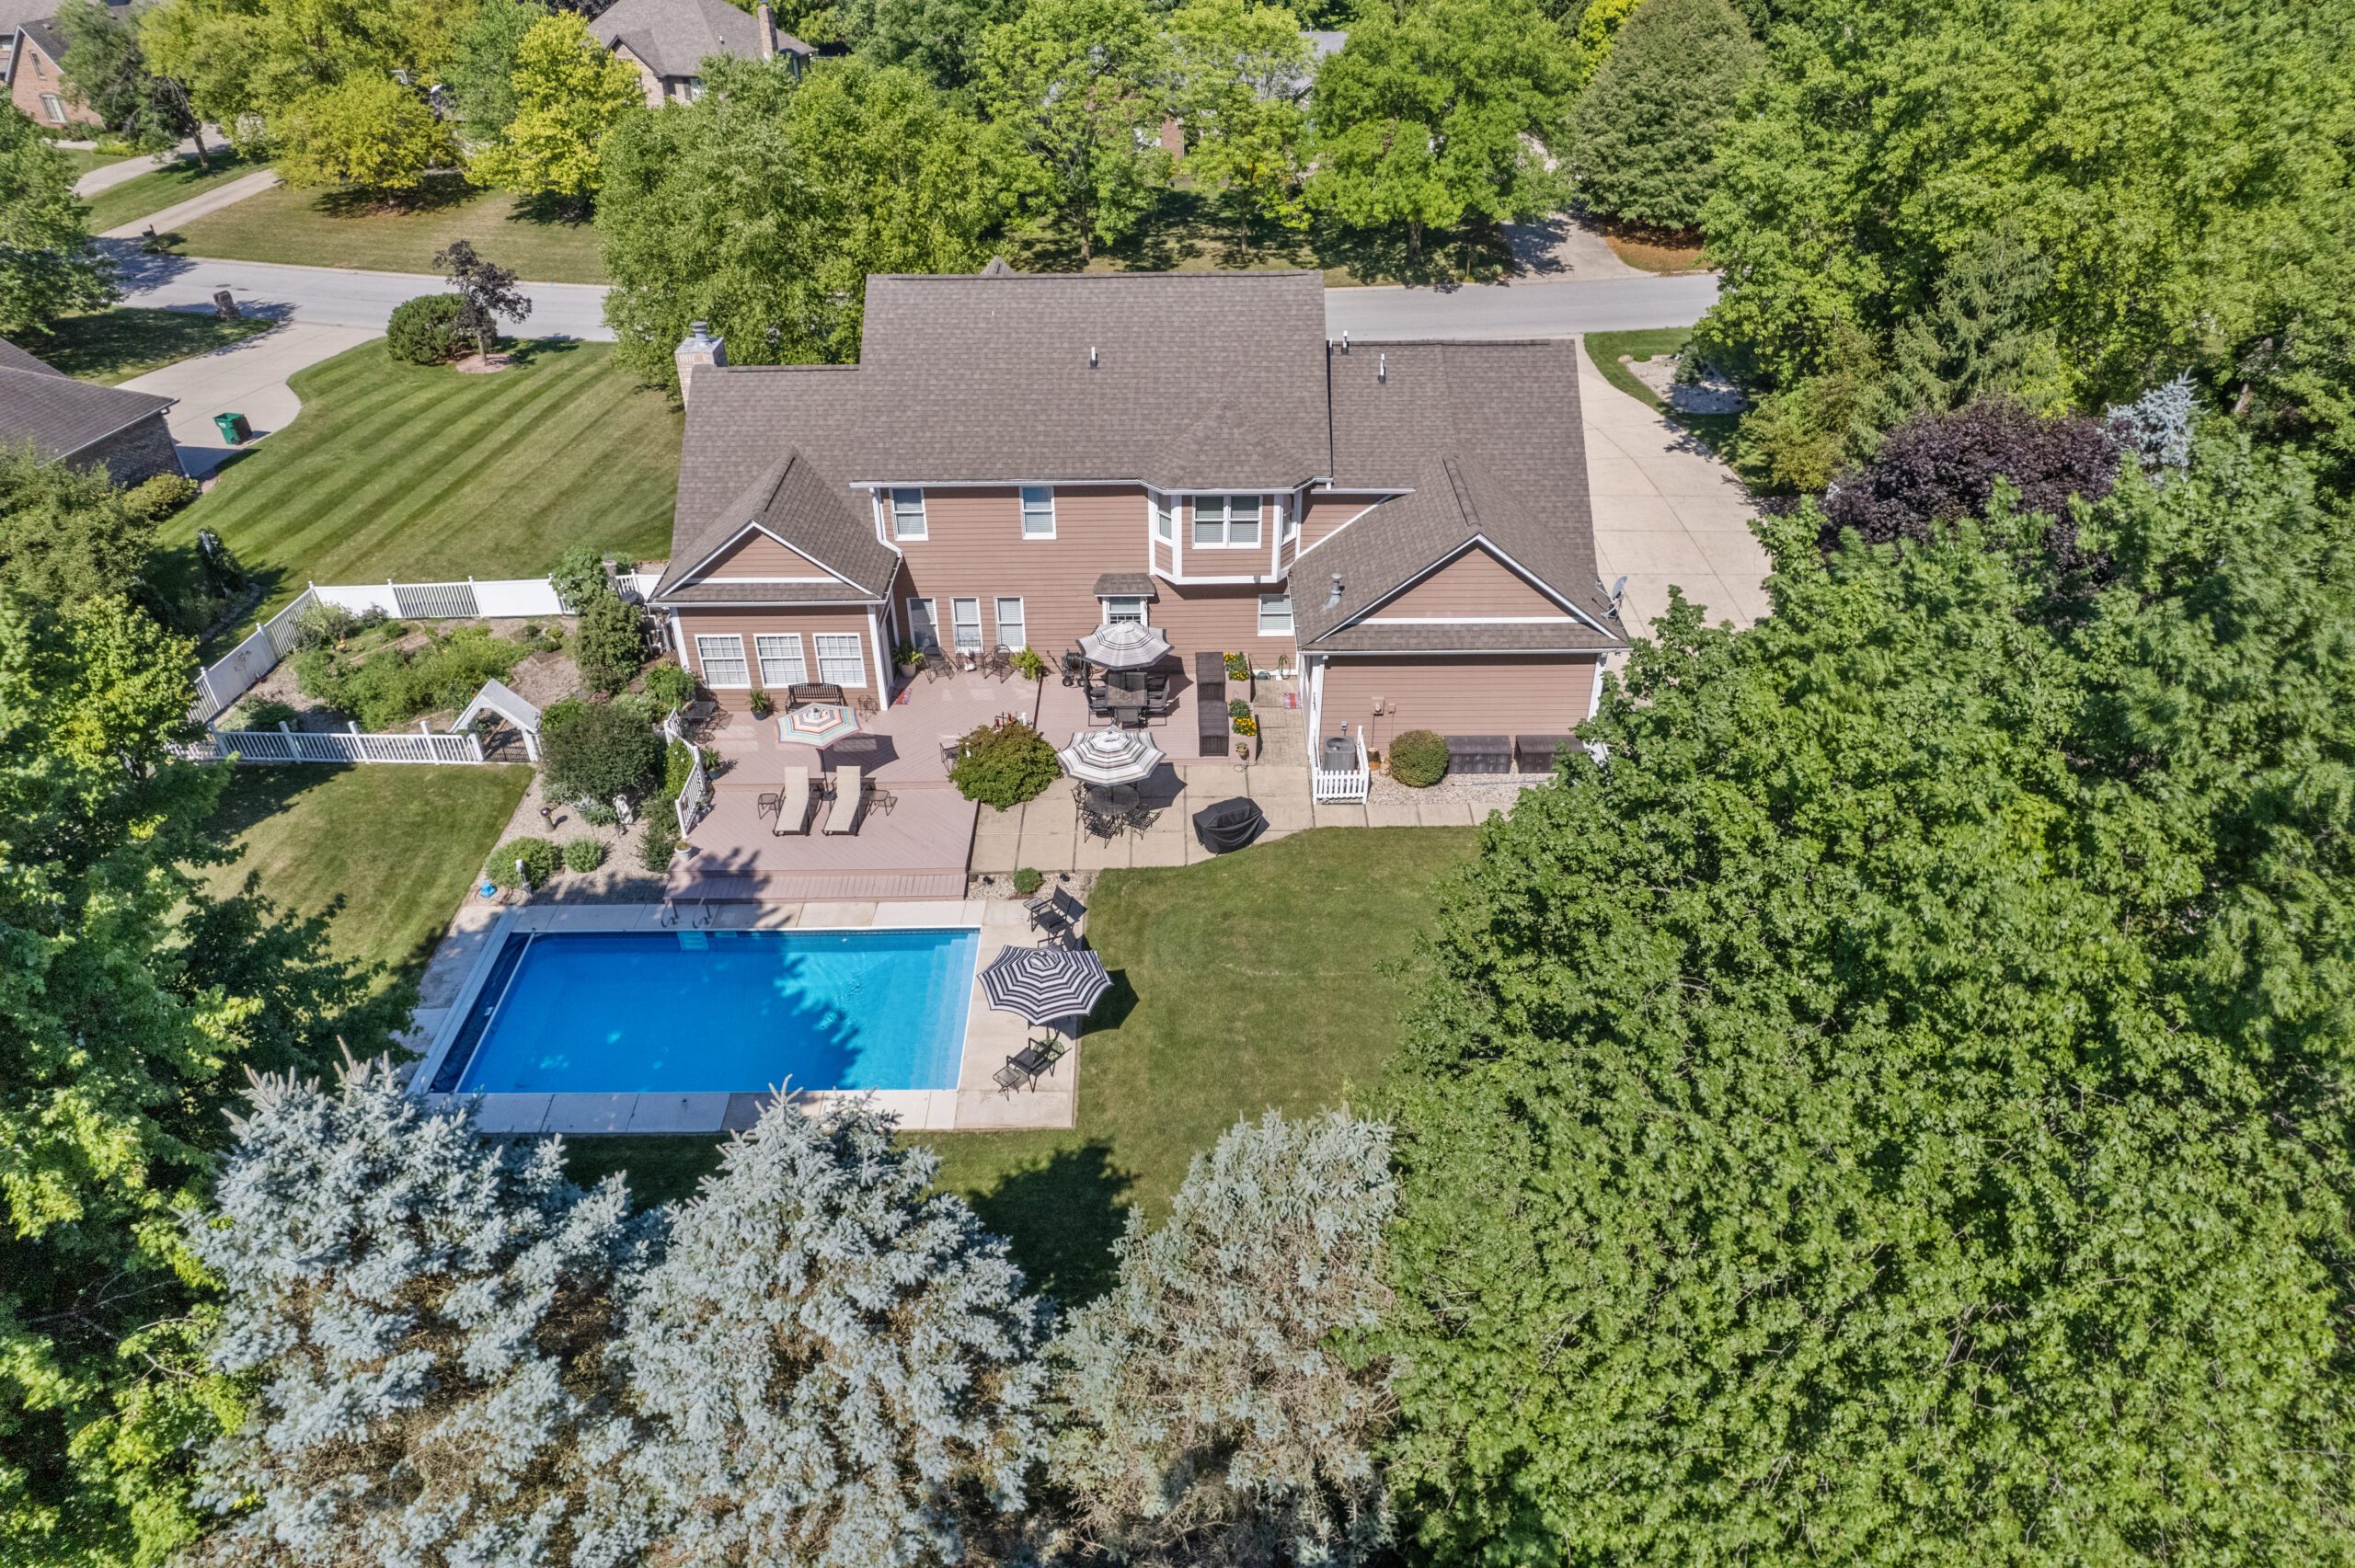 Aerial view of the back of a 2-storyt home with a swimming pool.